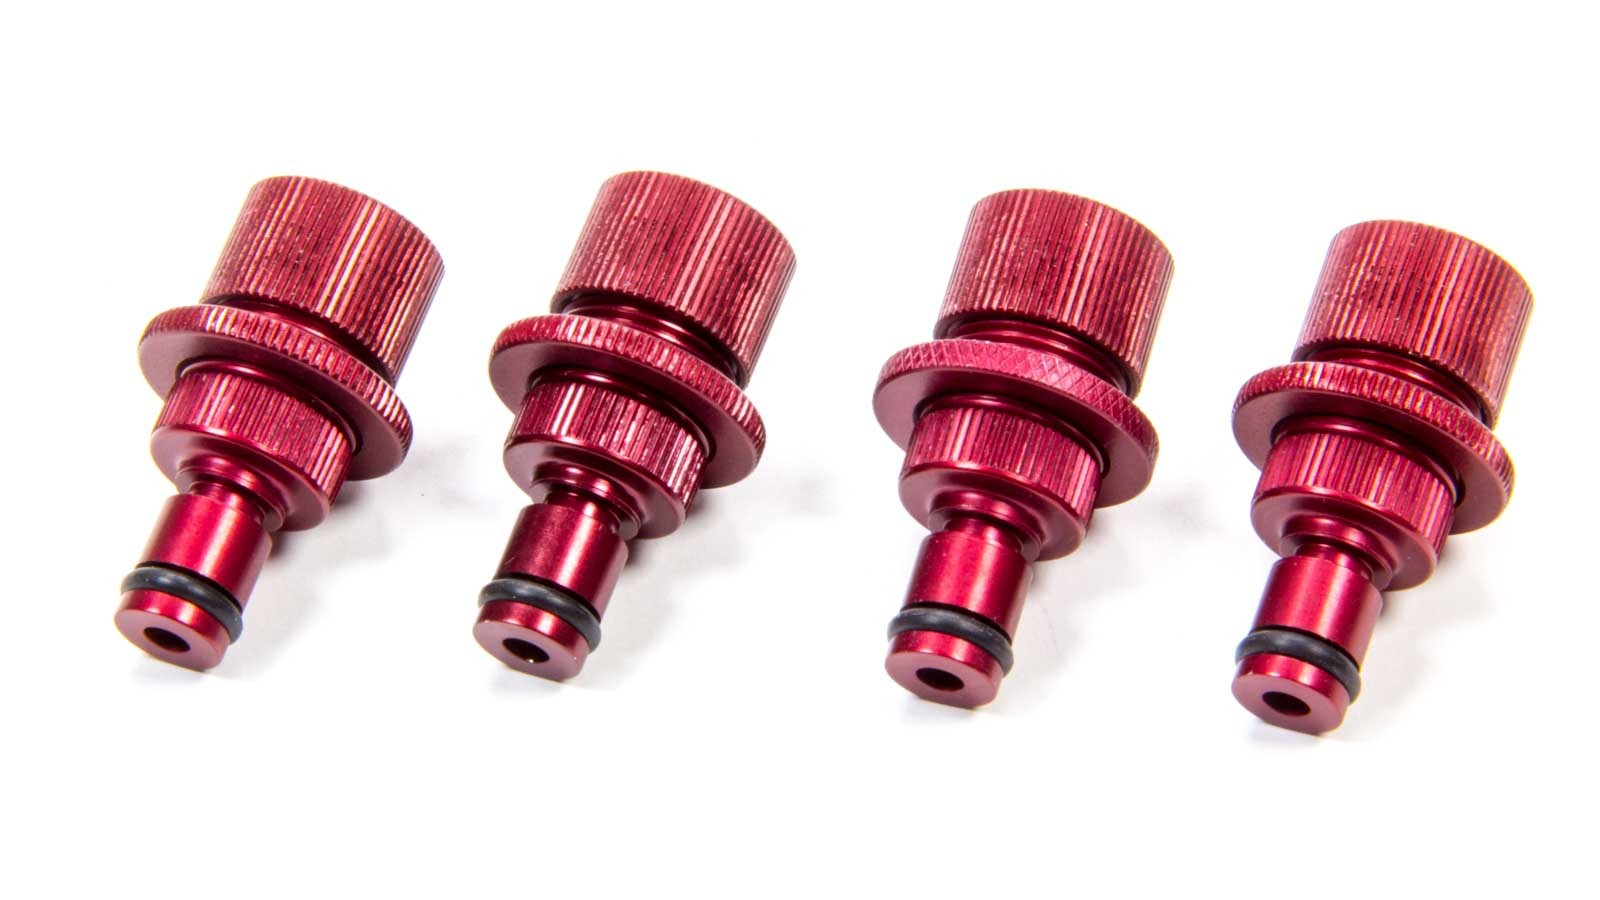 Kwik Change Products 713-100 Tire Pressure Relief Valve, Adjustable, Aluminum, Red Anodized, Set of 4